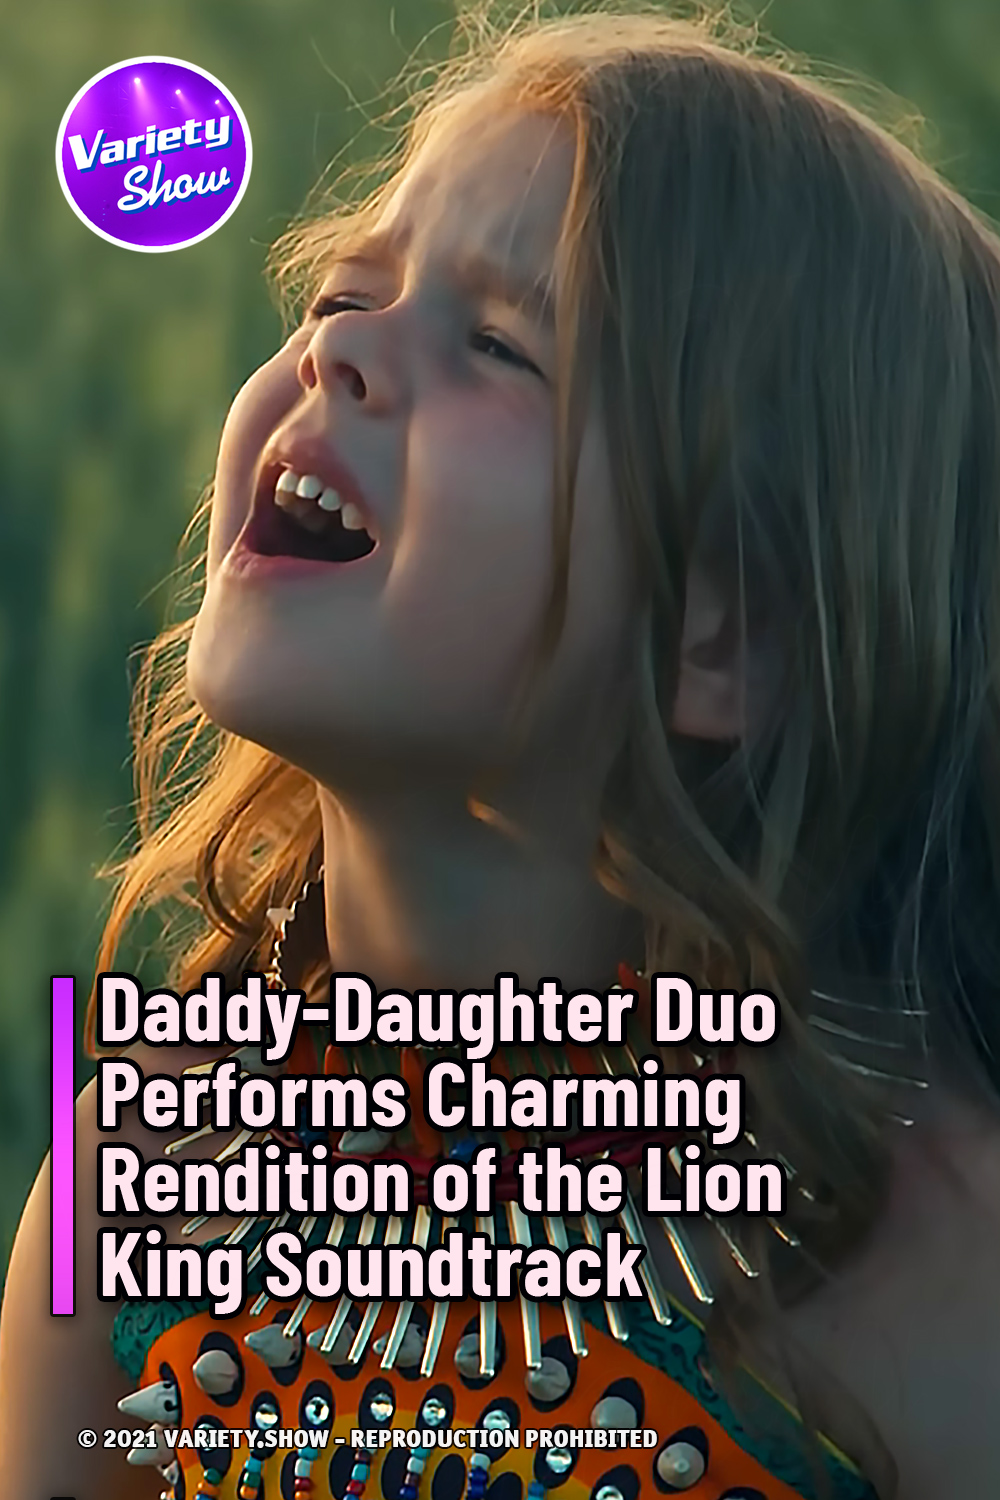 Daddy-Daughter Duo Performs Charming Rendition of the Lion King Soundtrack